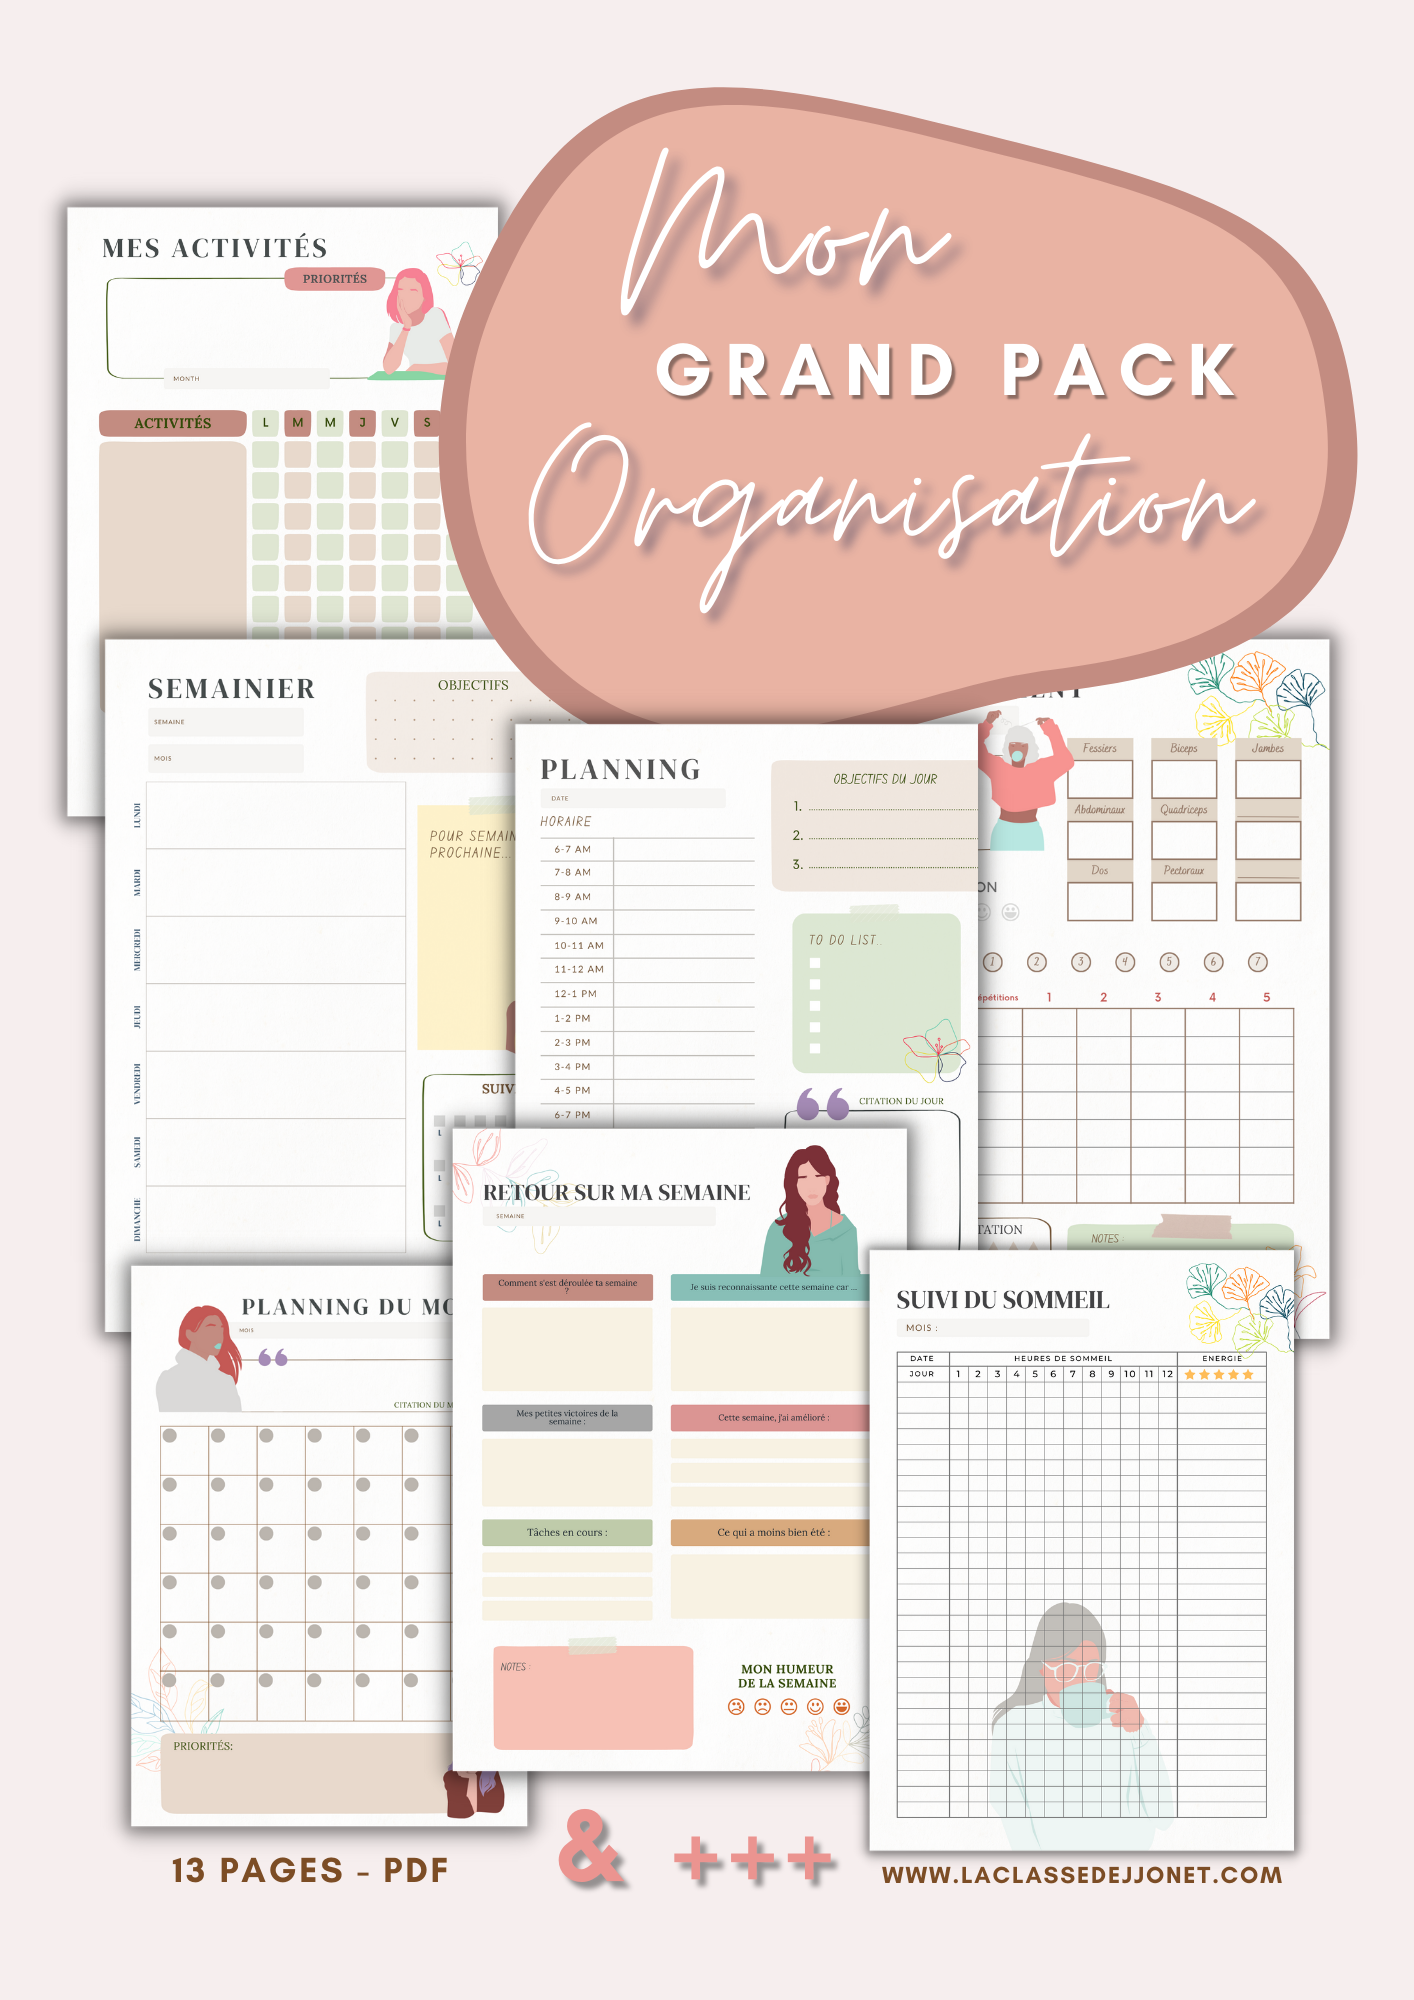 Mon grand pack d'organisation - COLORFUL (PDF)